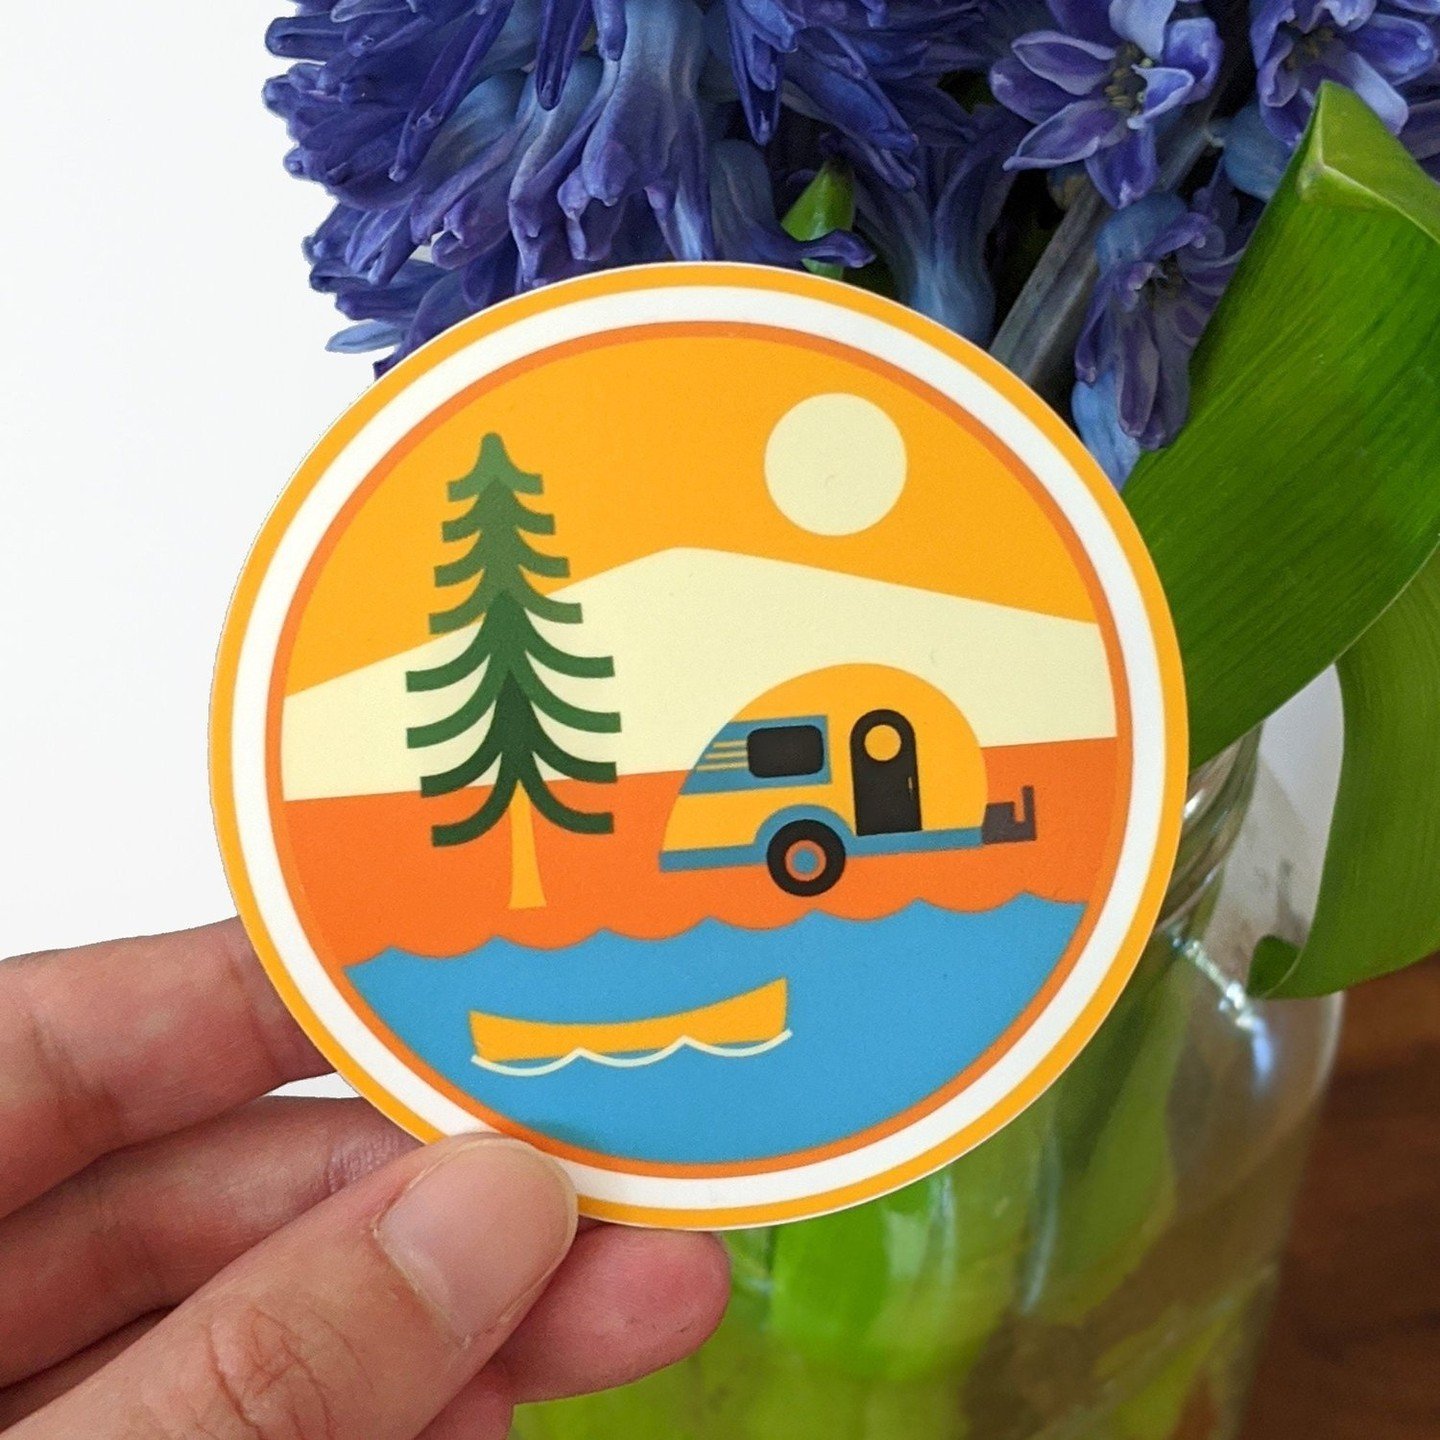 &quot;Not all who wander are lost.&quot; - J.R.R. Tolkien ⛰️We made so many amazing memories in our teardrop camper, and that was the inspiration for this sticker! Swipe to see &quot;Adventure Awaits&quot; and mountains of the PNW! 

What adventures 